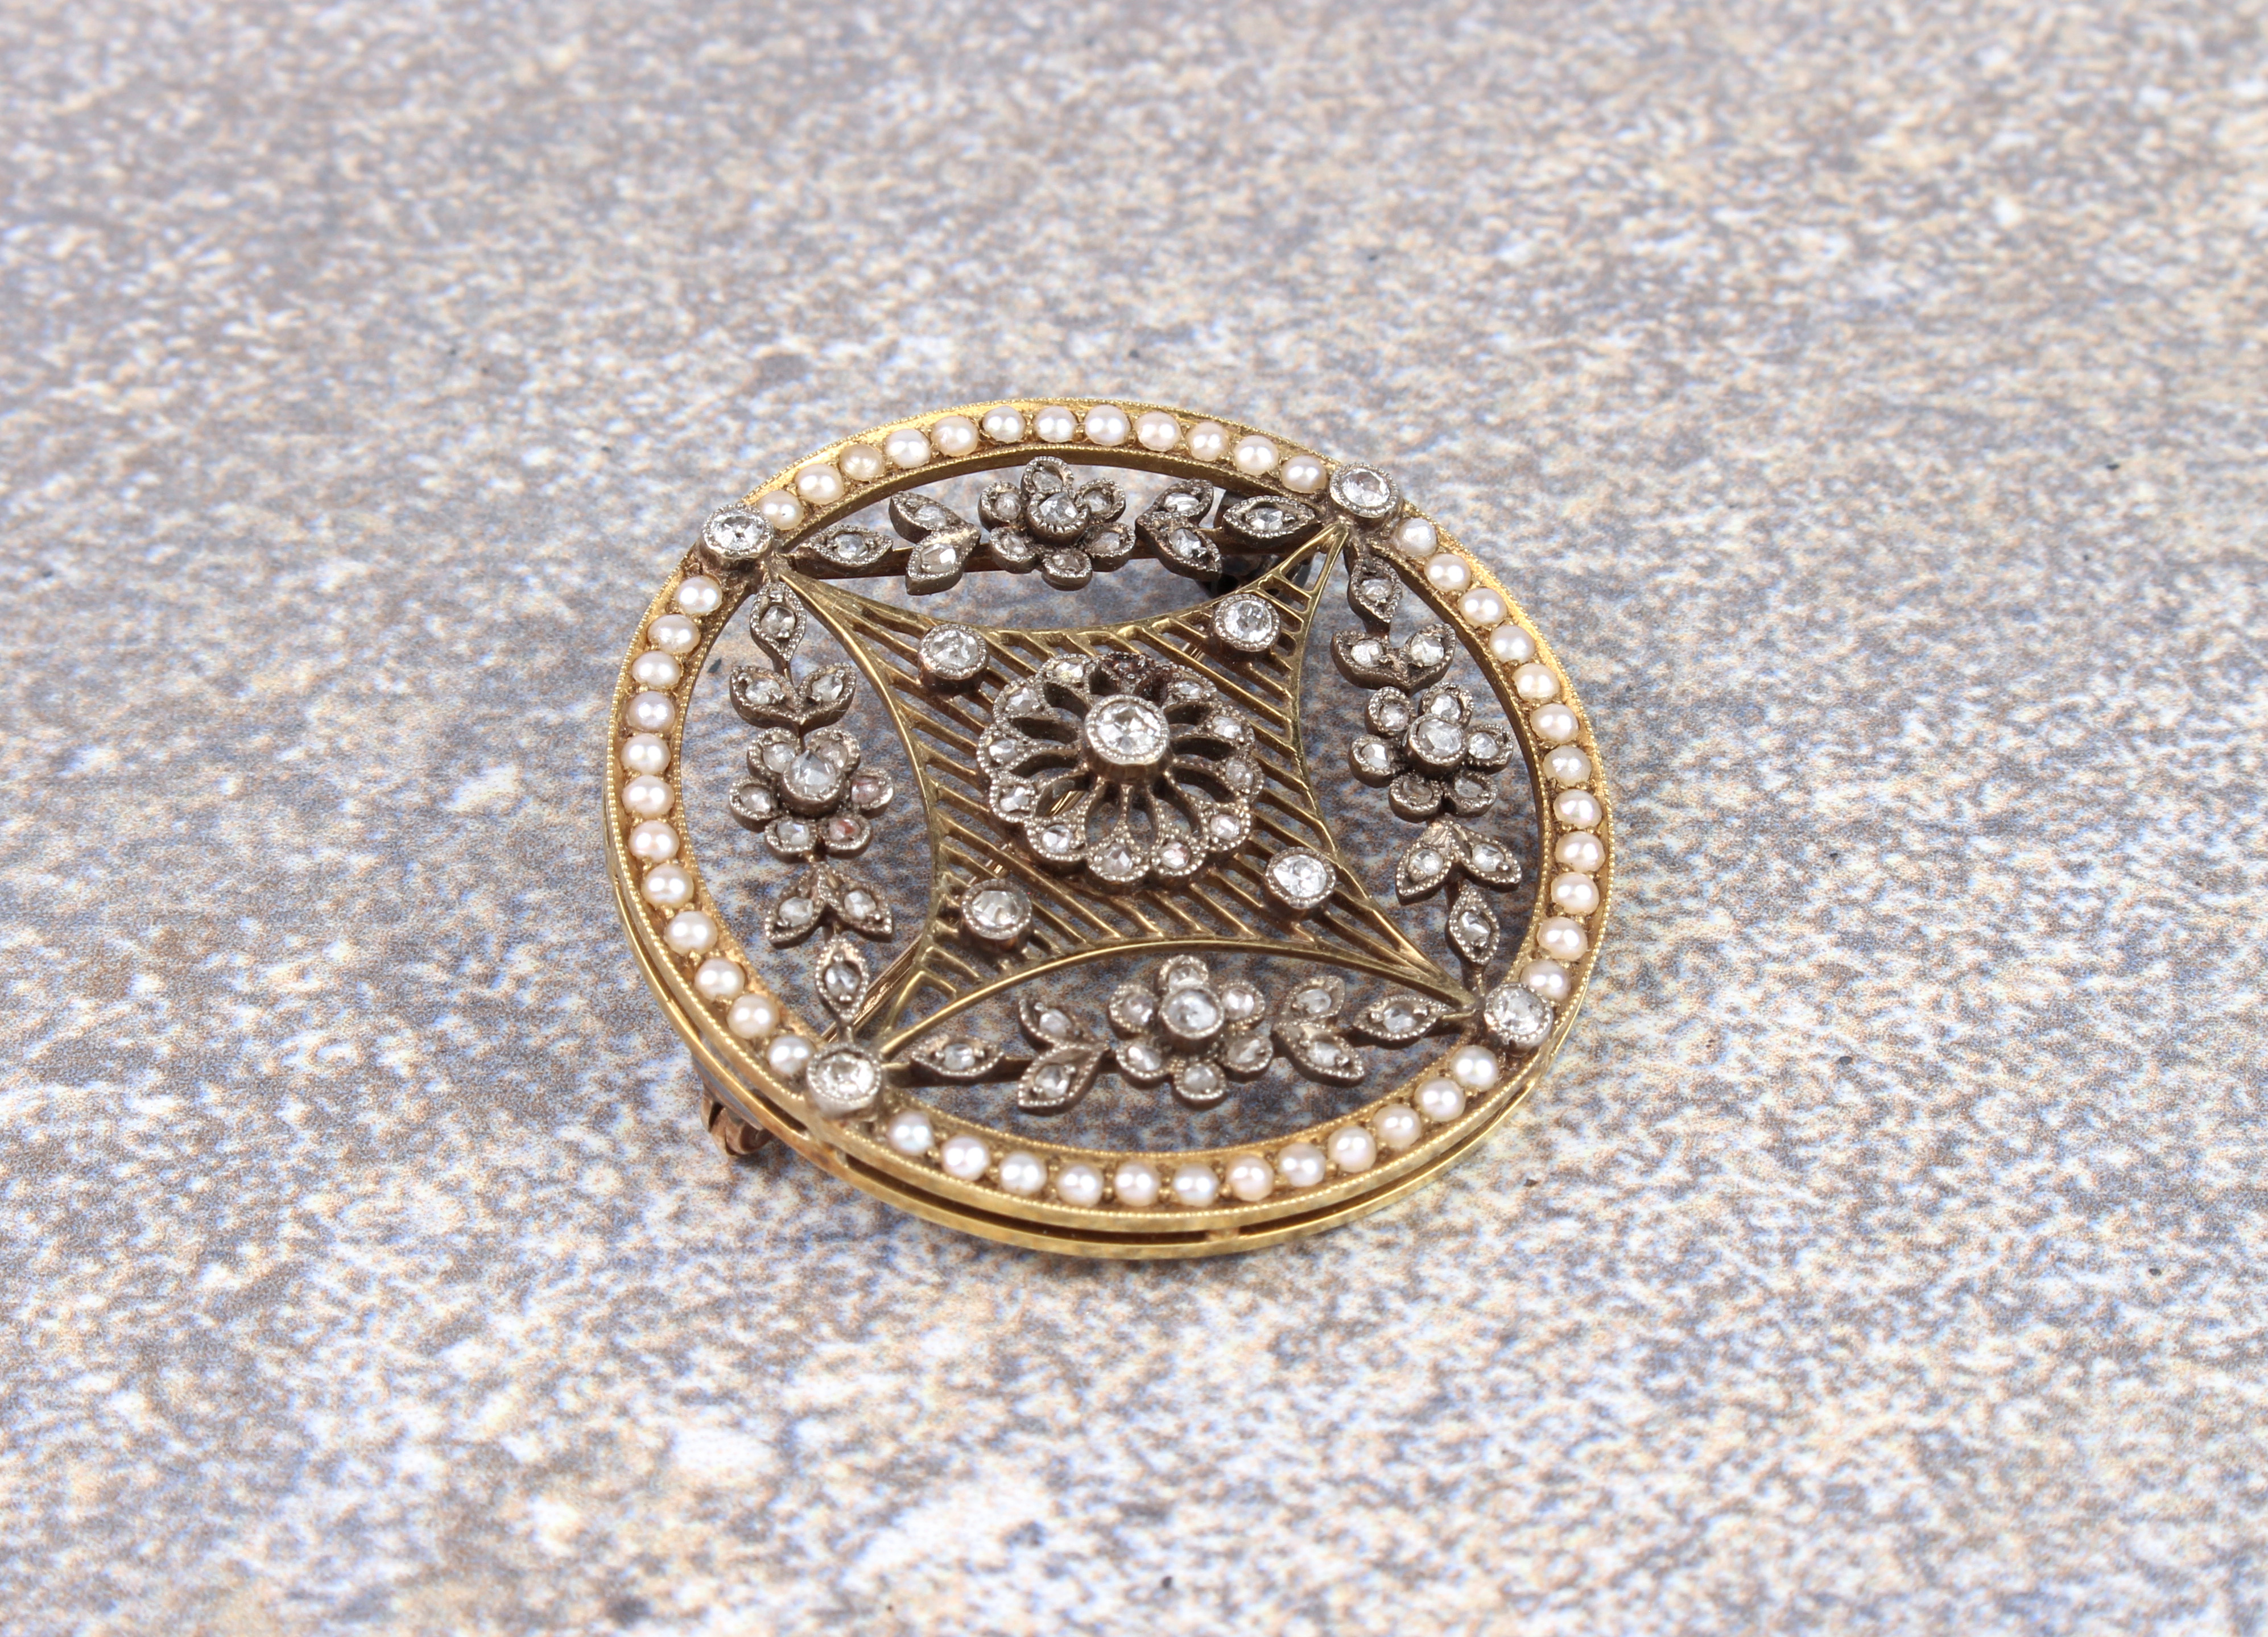 A fine Edwardian Belle Epoque 18ct gold, silver, seed pearl and diamond target brooch - unmarked but - Image 3 of 4